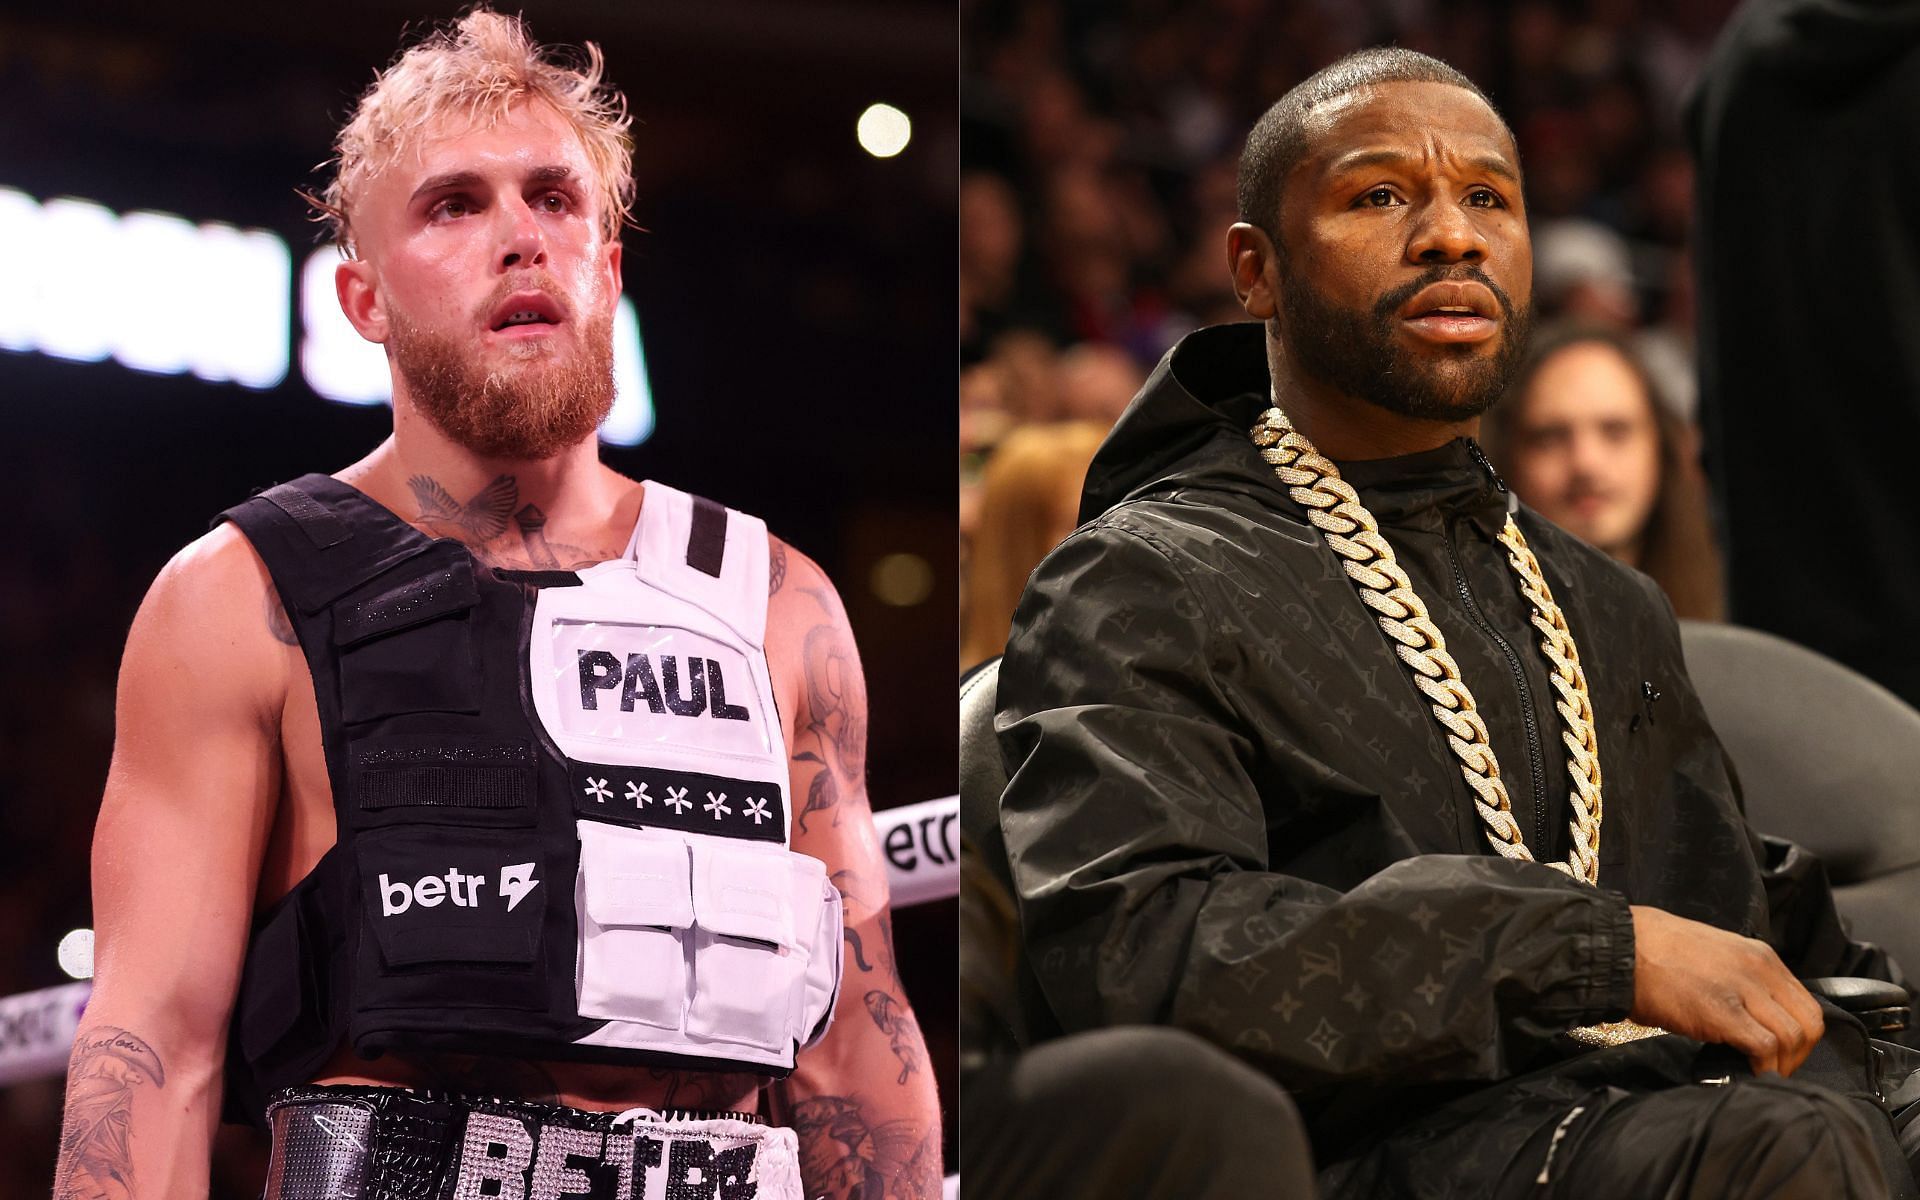 Jake Paul (left) and Floyd Mayweather (right) (Image credits Getty Images)